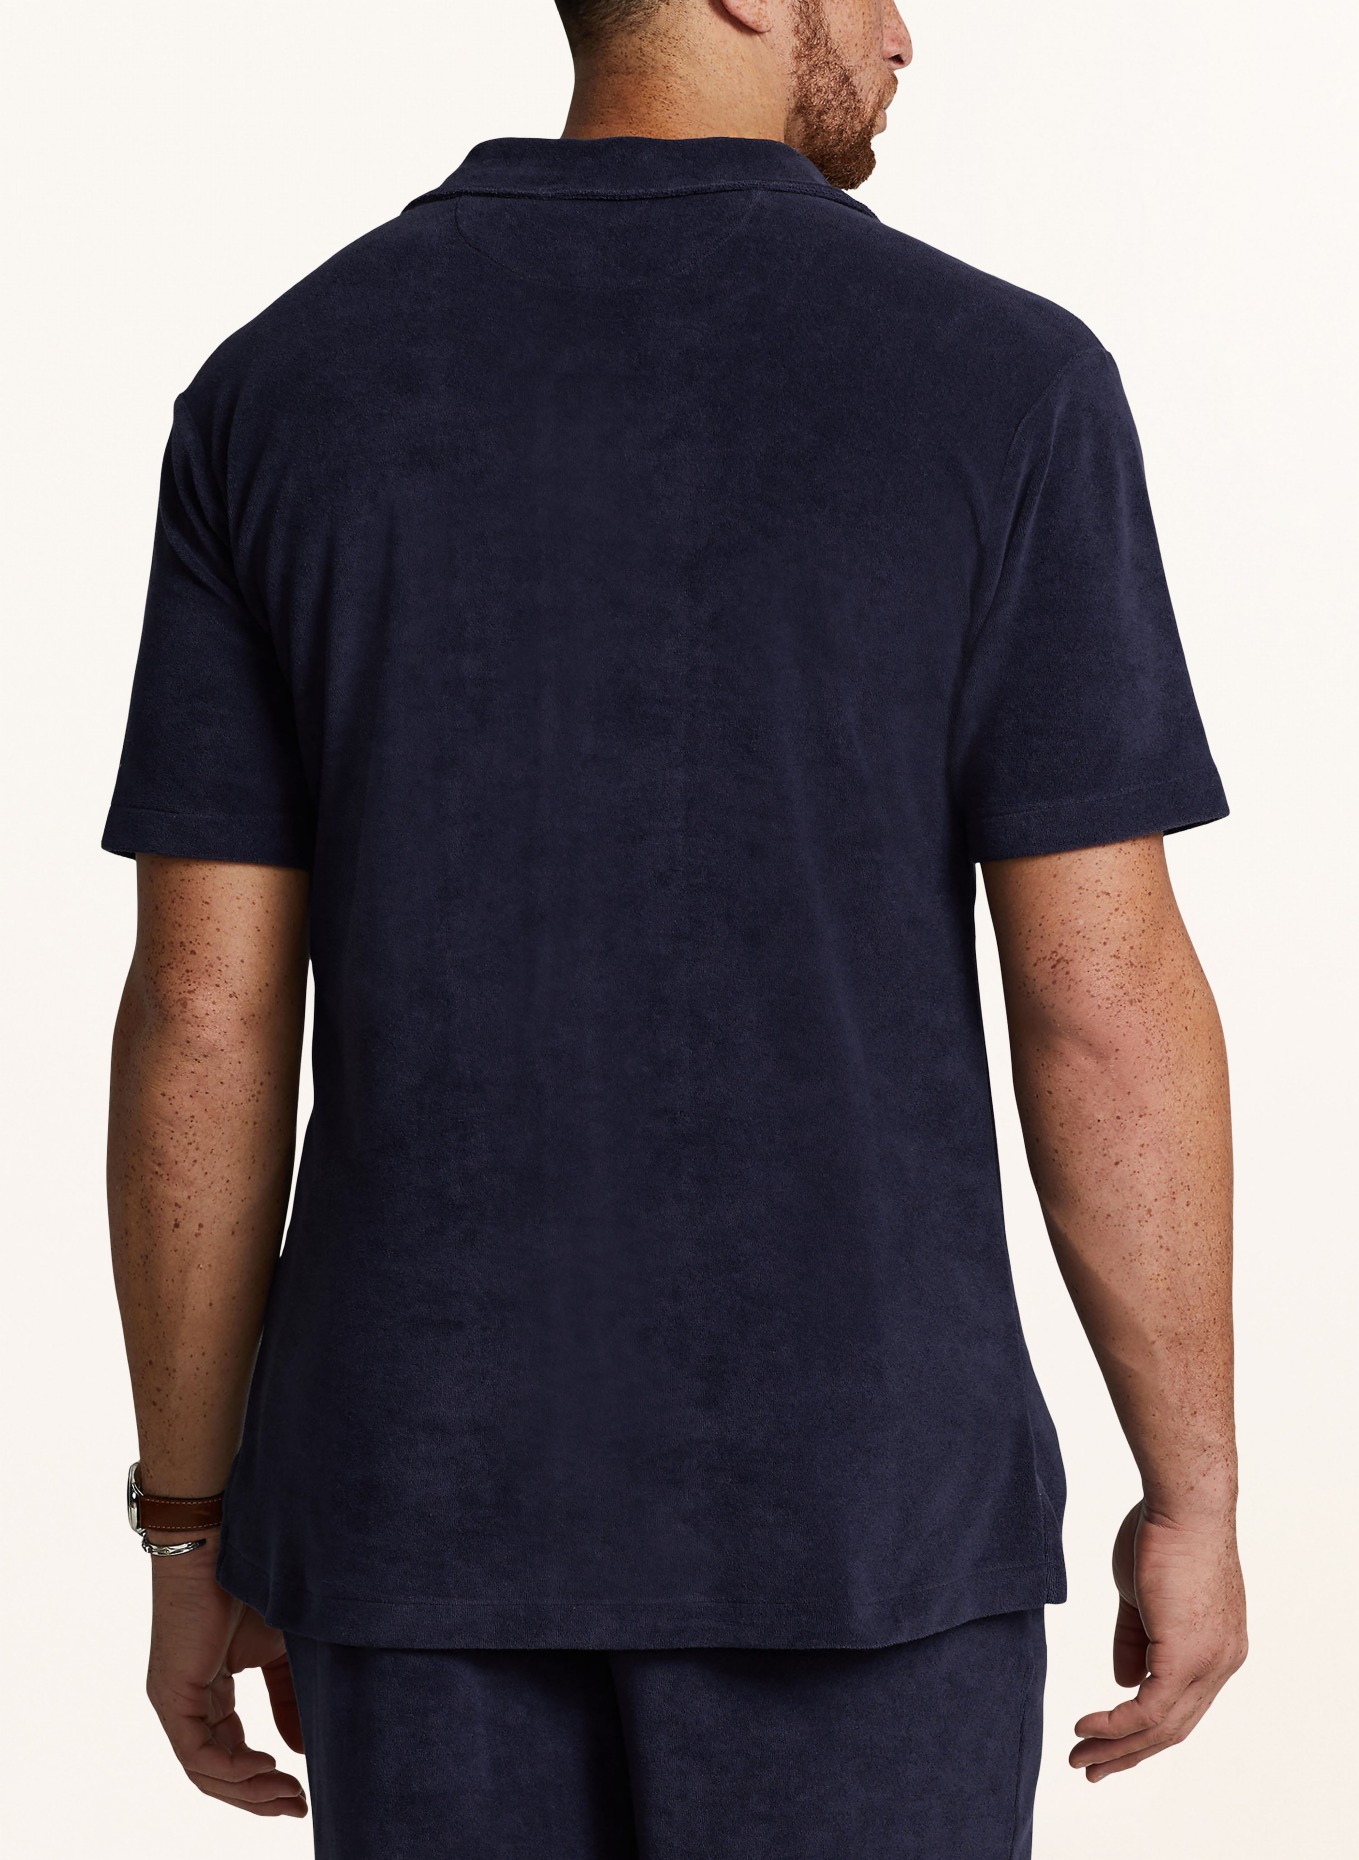 POLO RALPH LAUREN Big & Tall Short sleeve shirt comfort fit made of terry cloth, Color: DARK BLUE (Image 3)